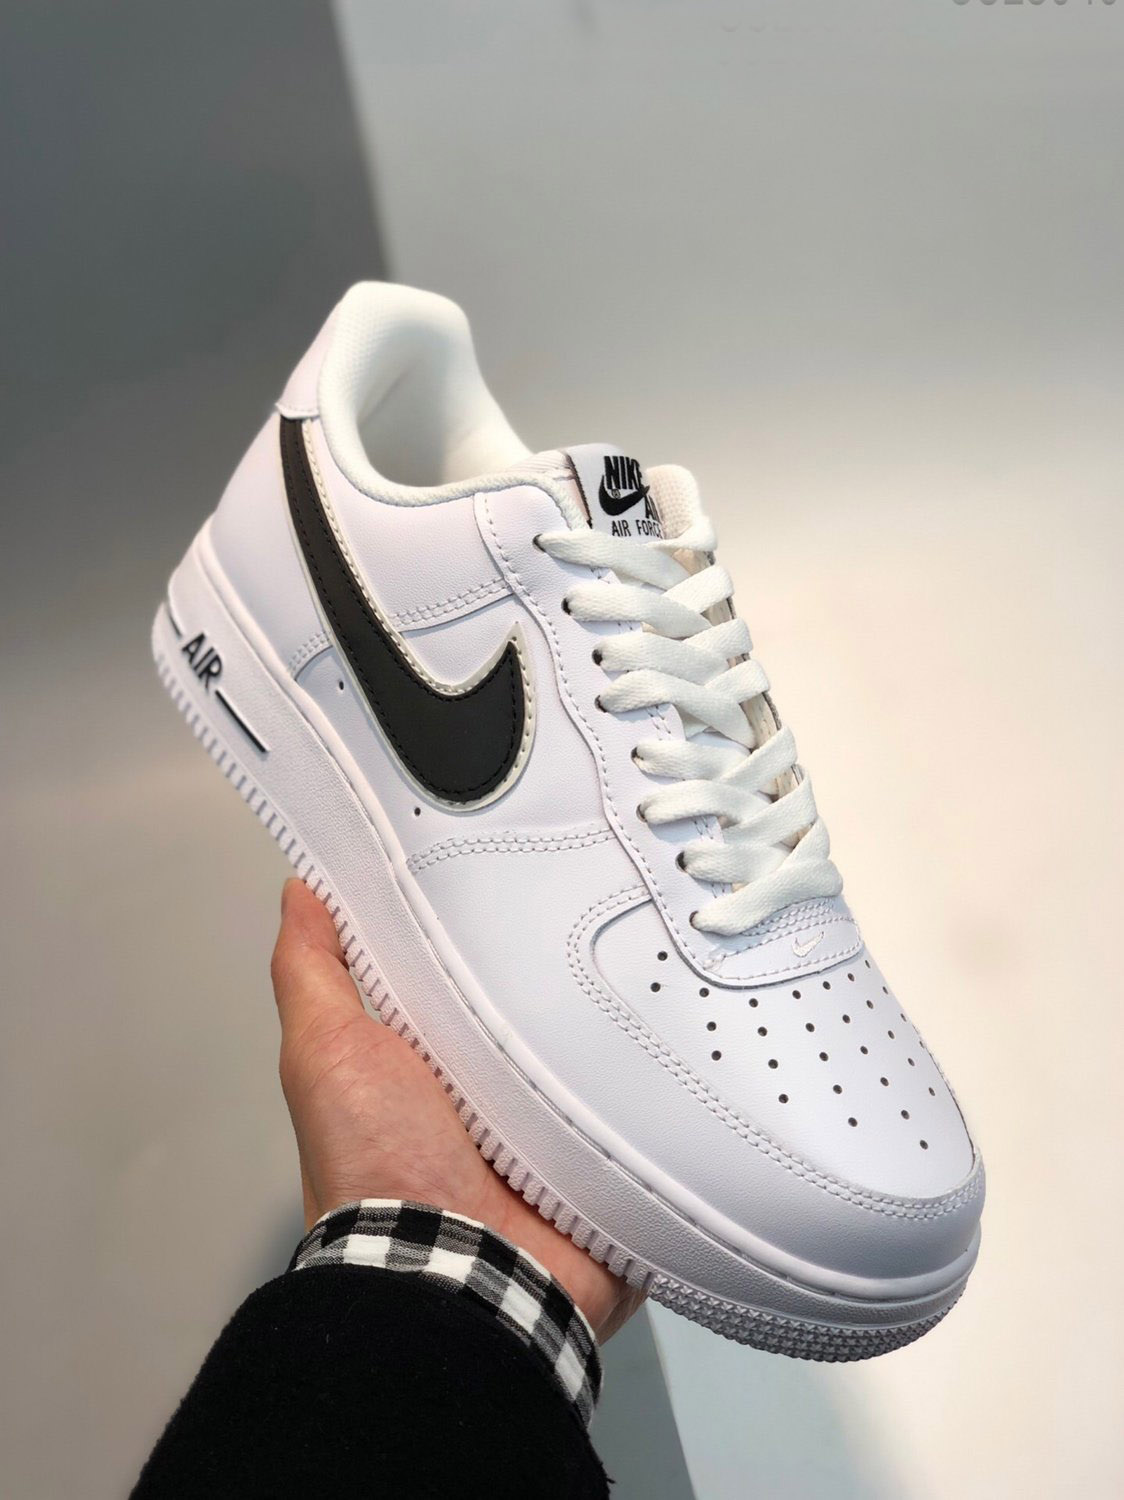 Luminance Facture dachat Fumée nike air force 1 03 Je suis daccord pour ...